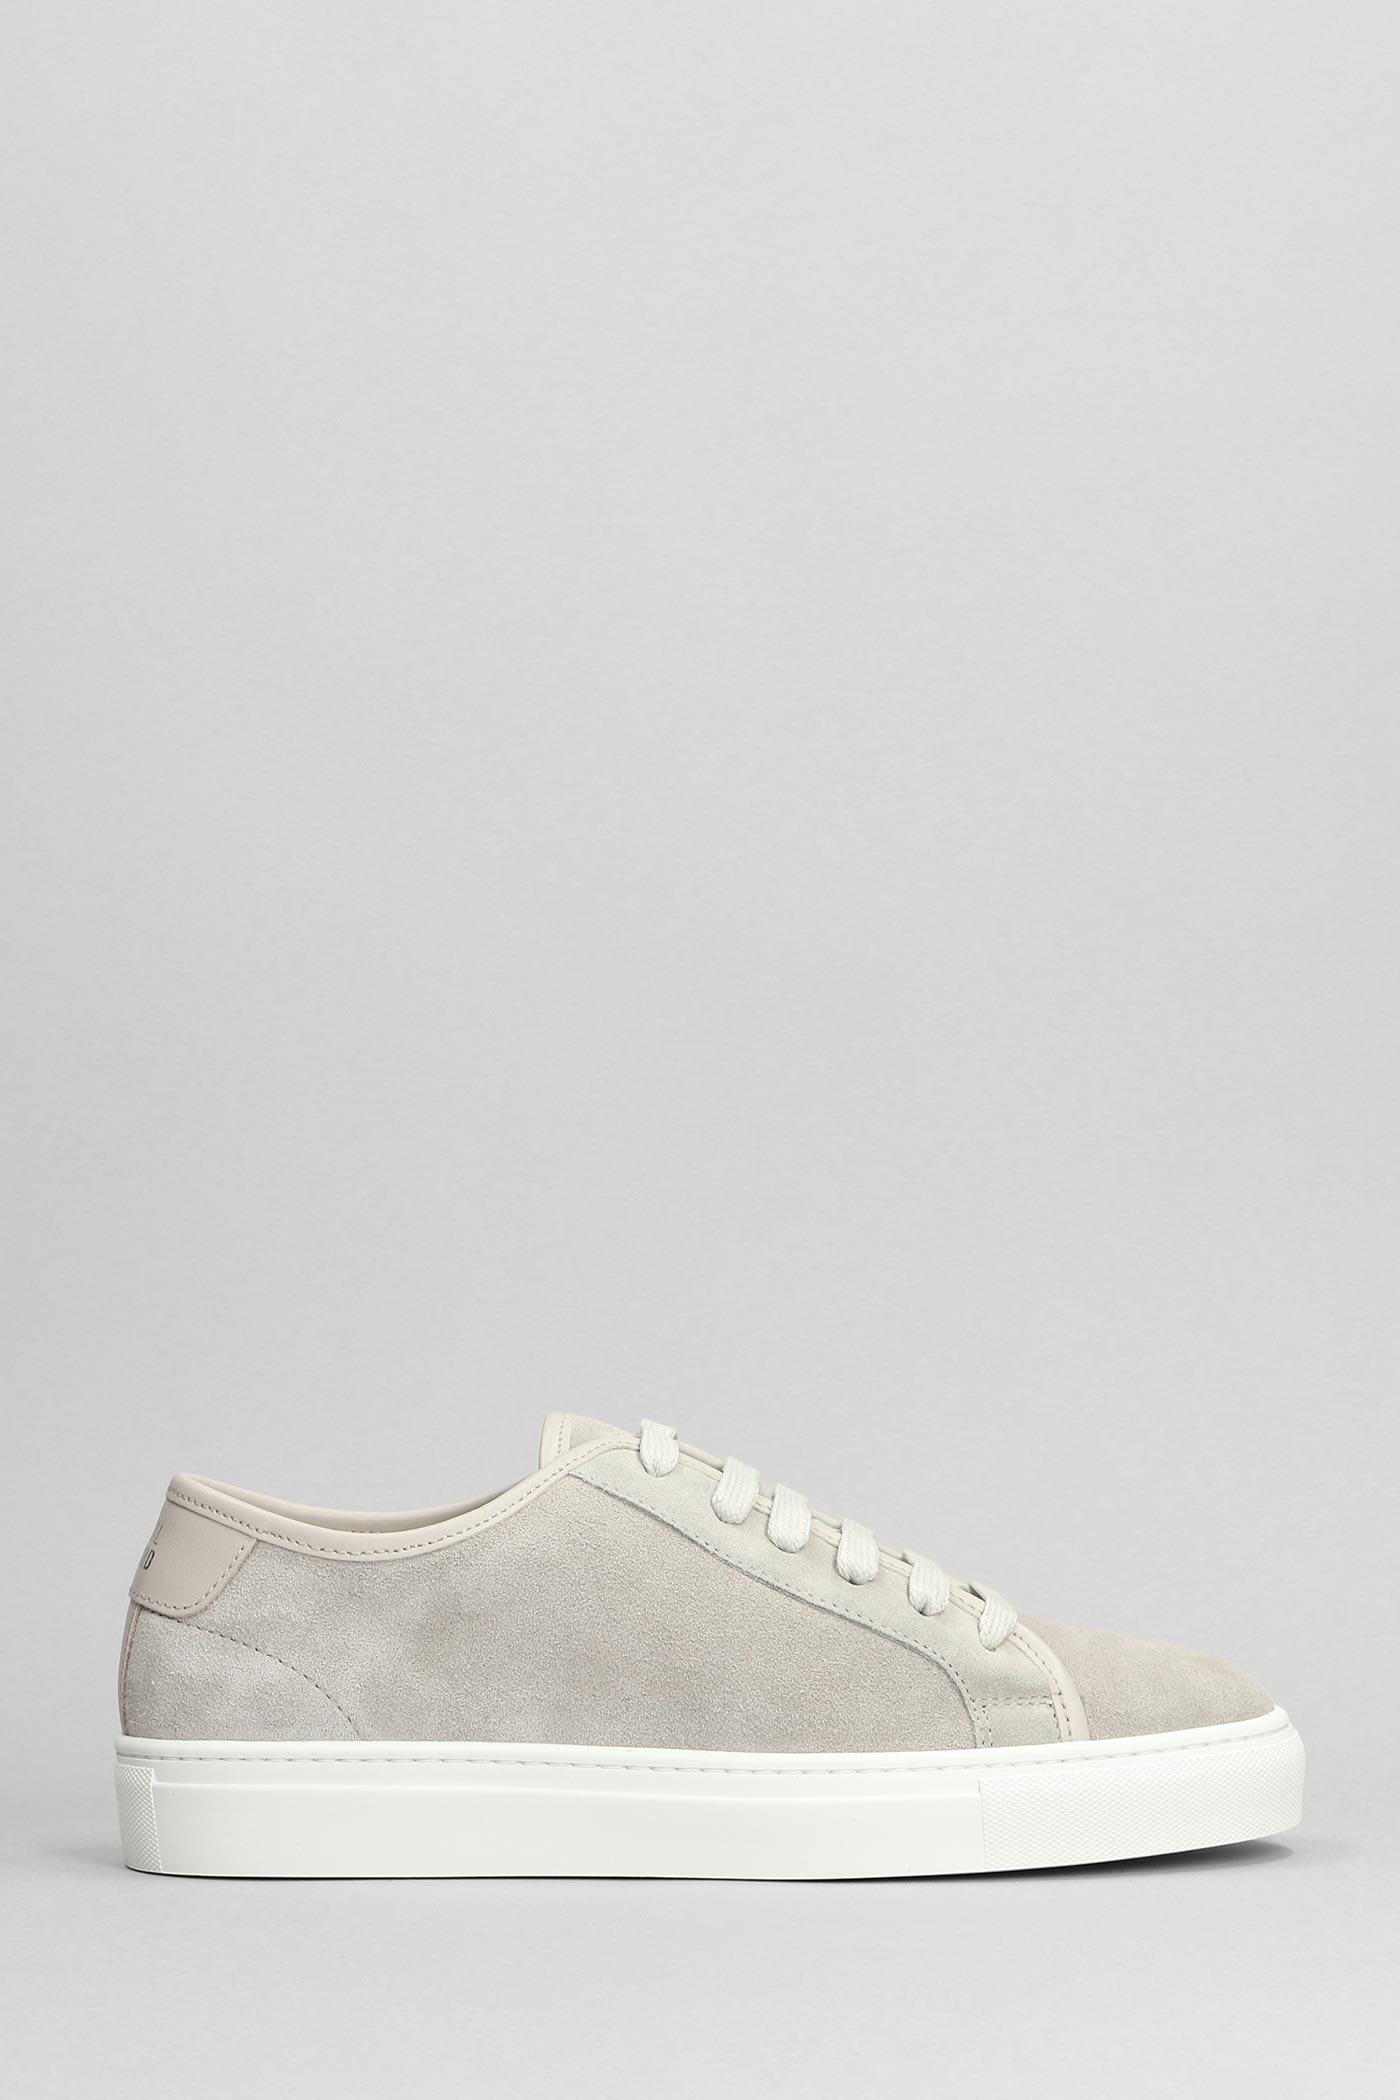 Edition 3 Low Sneakers In Grey Suede